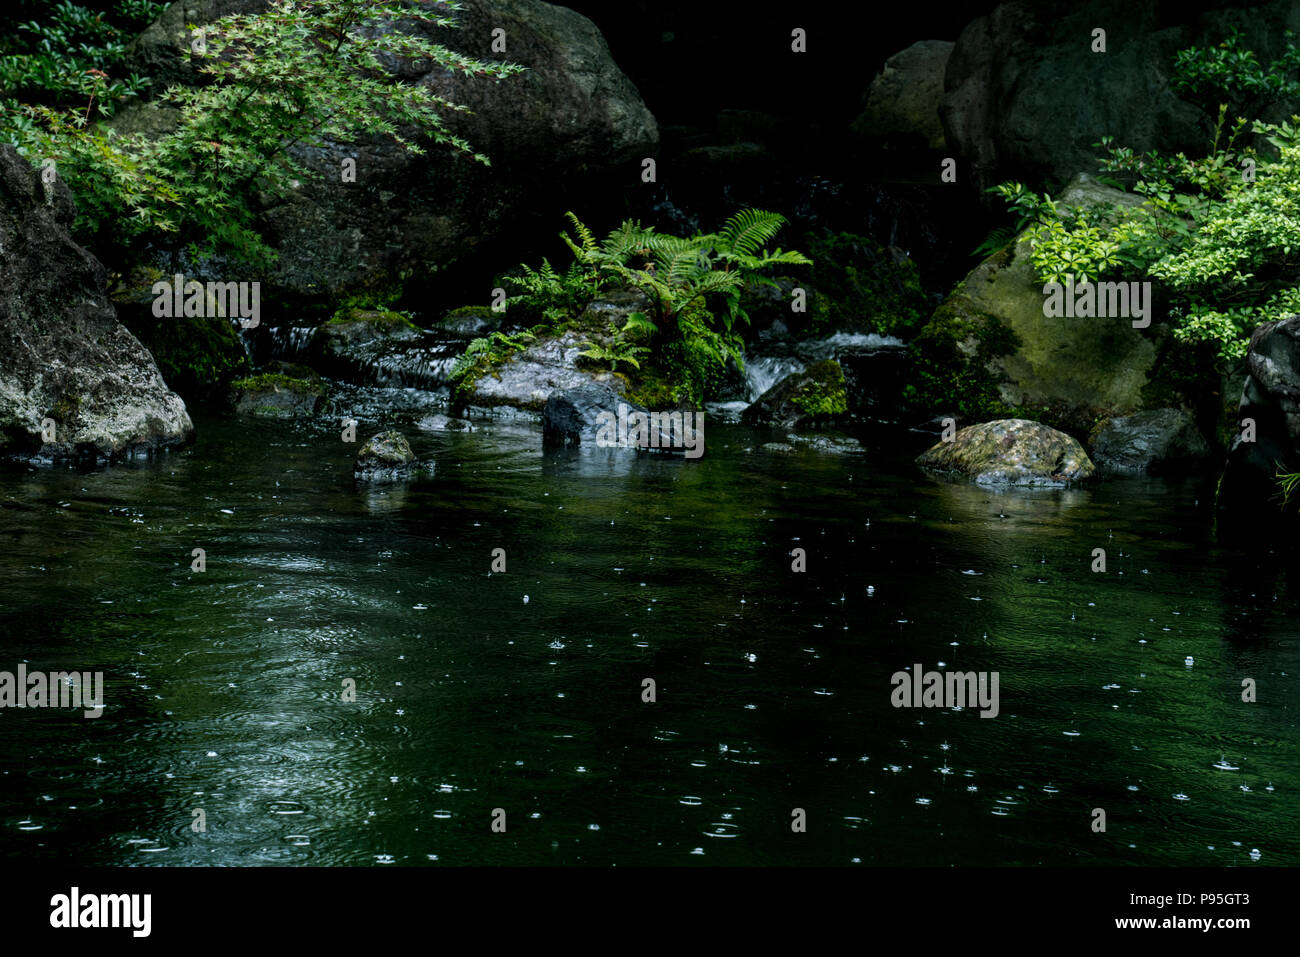 Droplets hitting water surface. Adachi Museum Garden, one of Japan's most beautiful gardens. Stock Photo